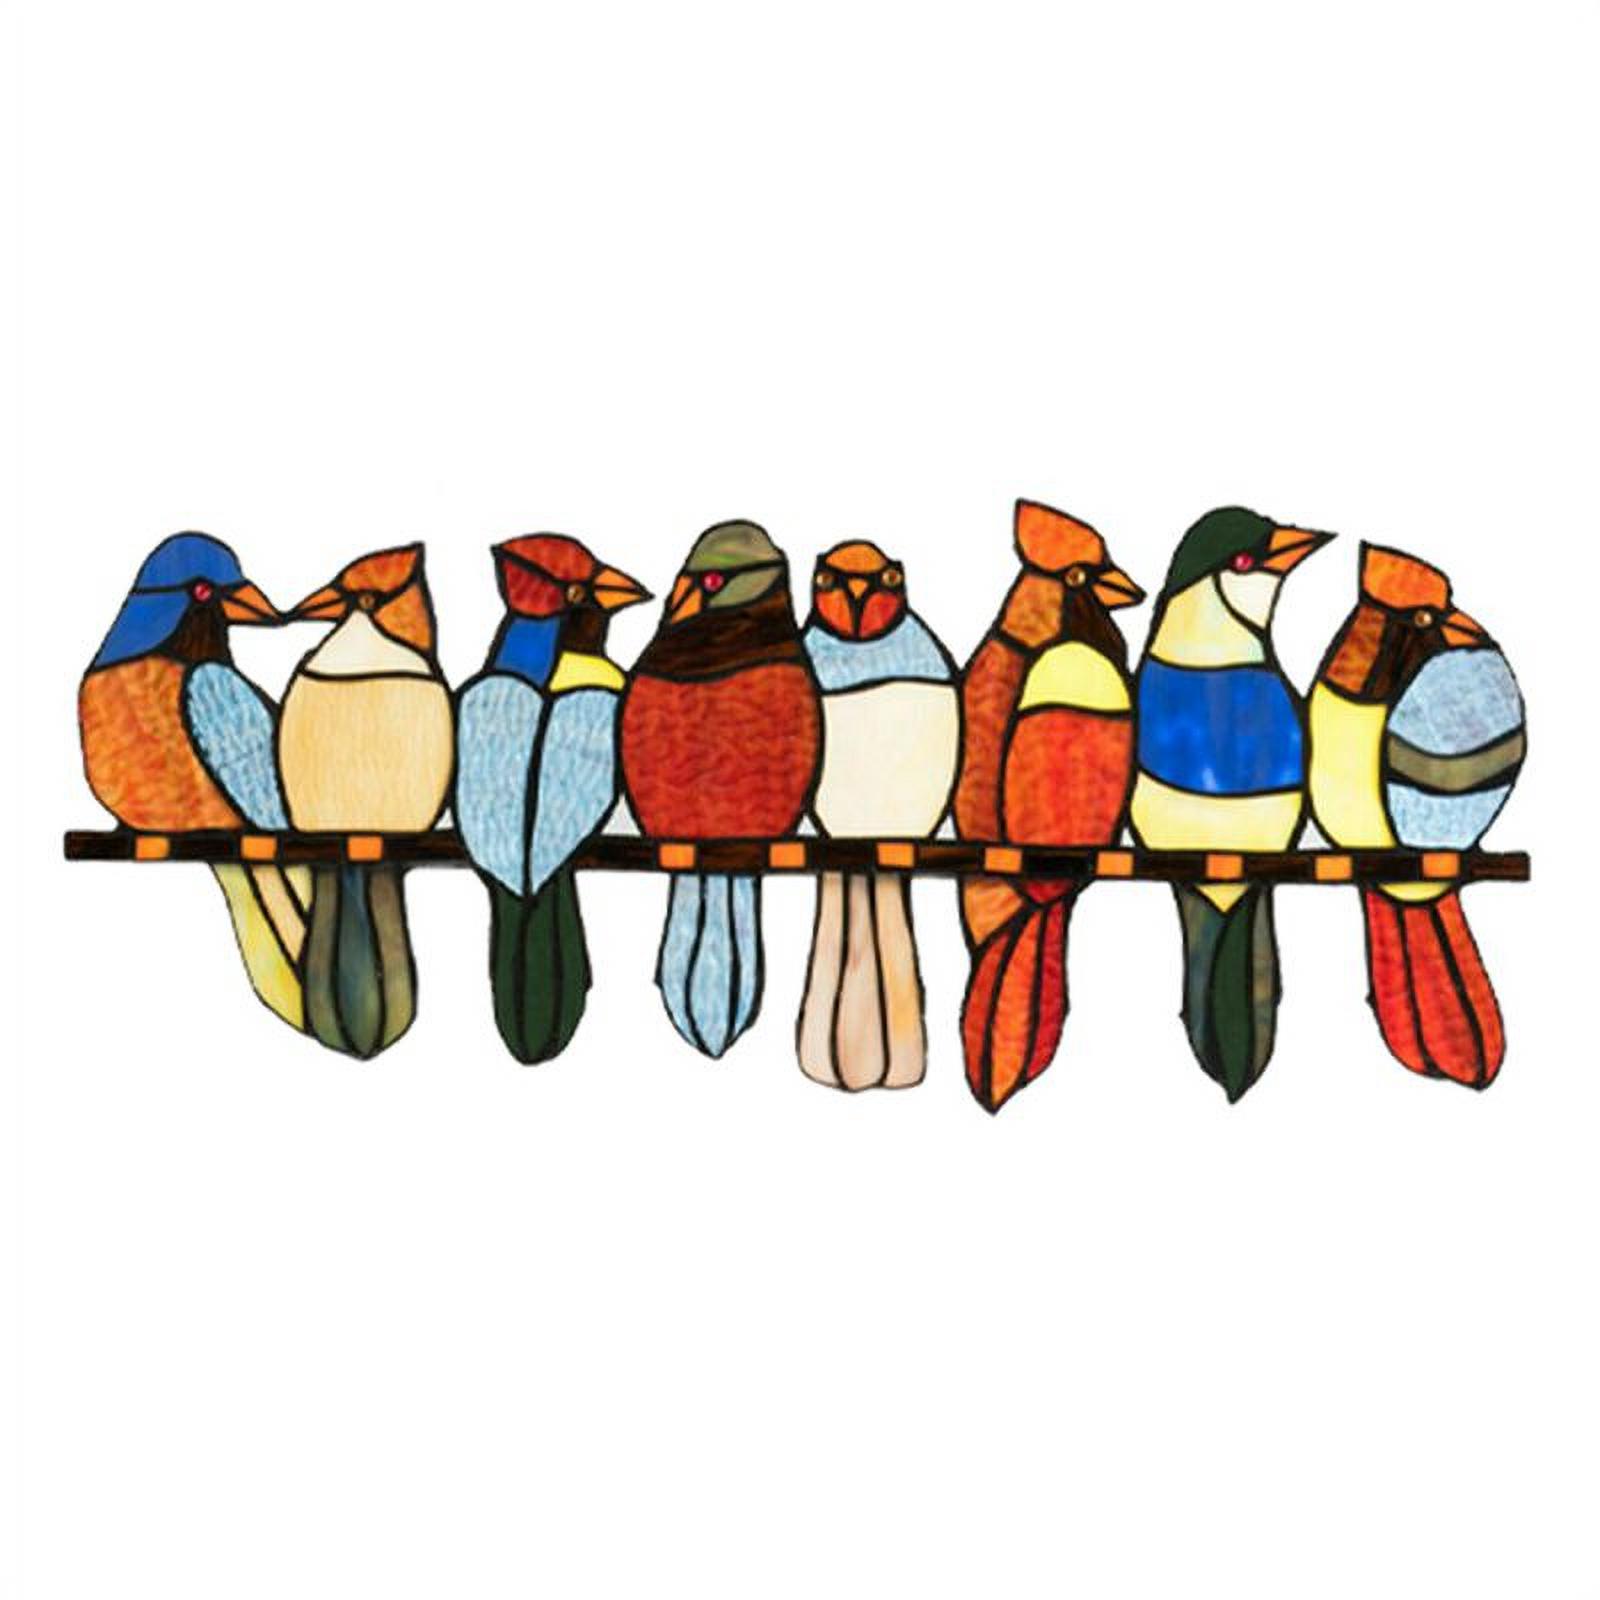 Taicanon Stained Glass Bird Sticker, Stain Glass Window Bird Decor Peeking Bird, Window Stained Glass Panels Sticker for Home Decor(Style 6) - image 1 of 7